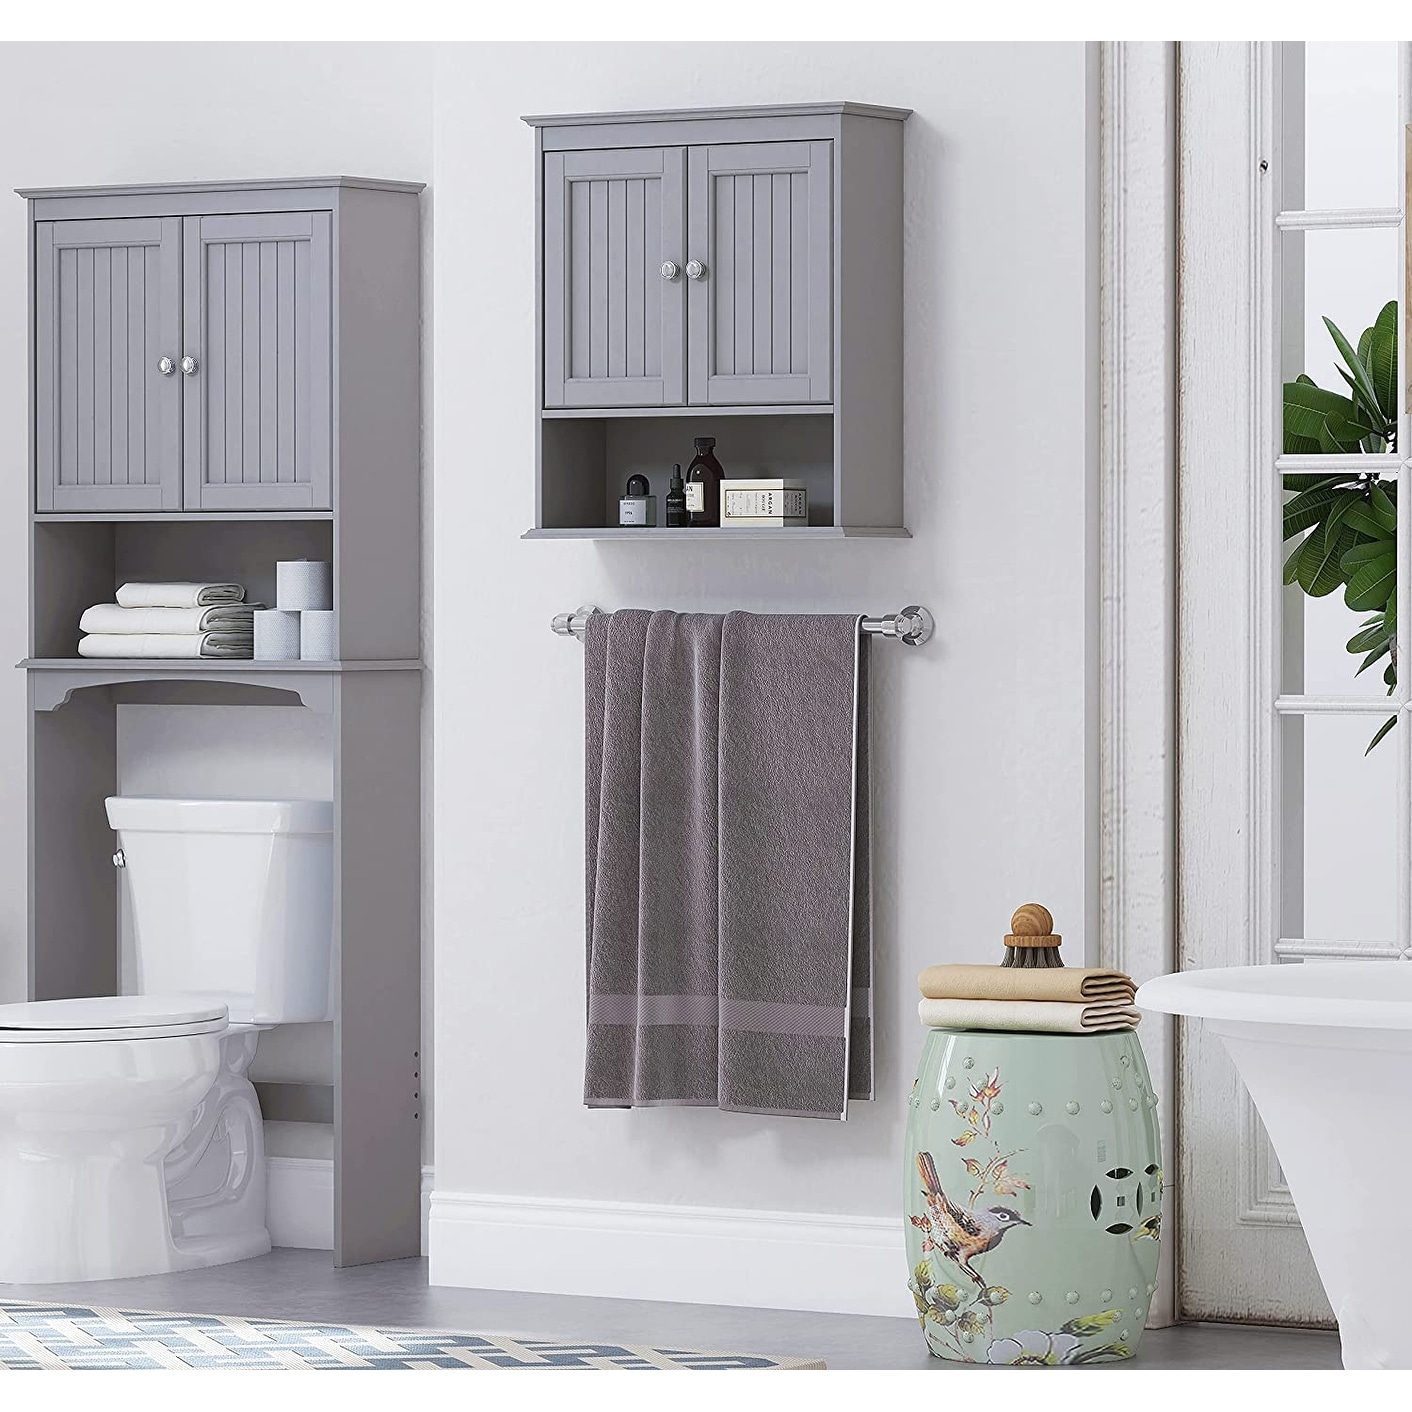 https://ak1.ostkcdn.com/images/products/is/images/direct/50a312c230d2b7454fae87091feaab59b9818c1d/Spirich-Bathroom-Wall-Spacesaver-Storage-Cabinet-Over-The-Toilet-with-Door-%2C-Wooden%2C-White.jpg